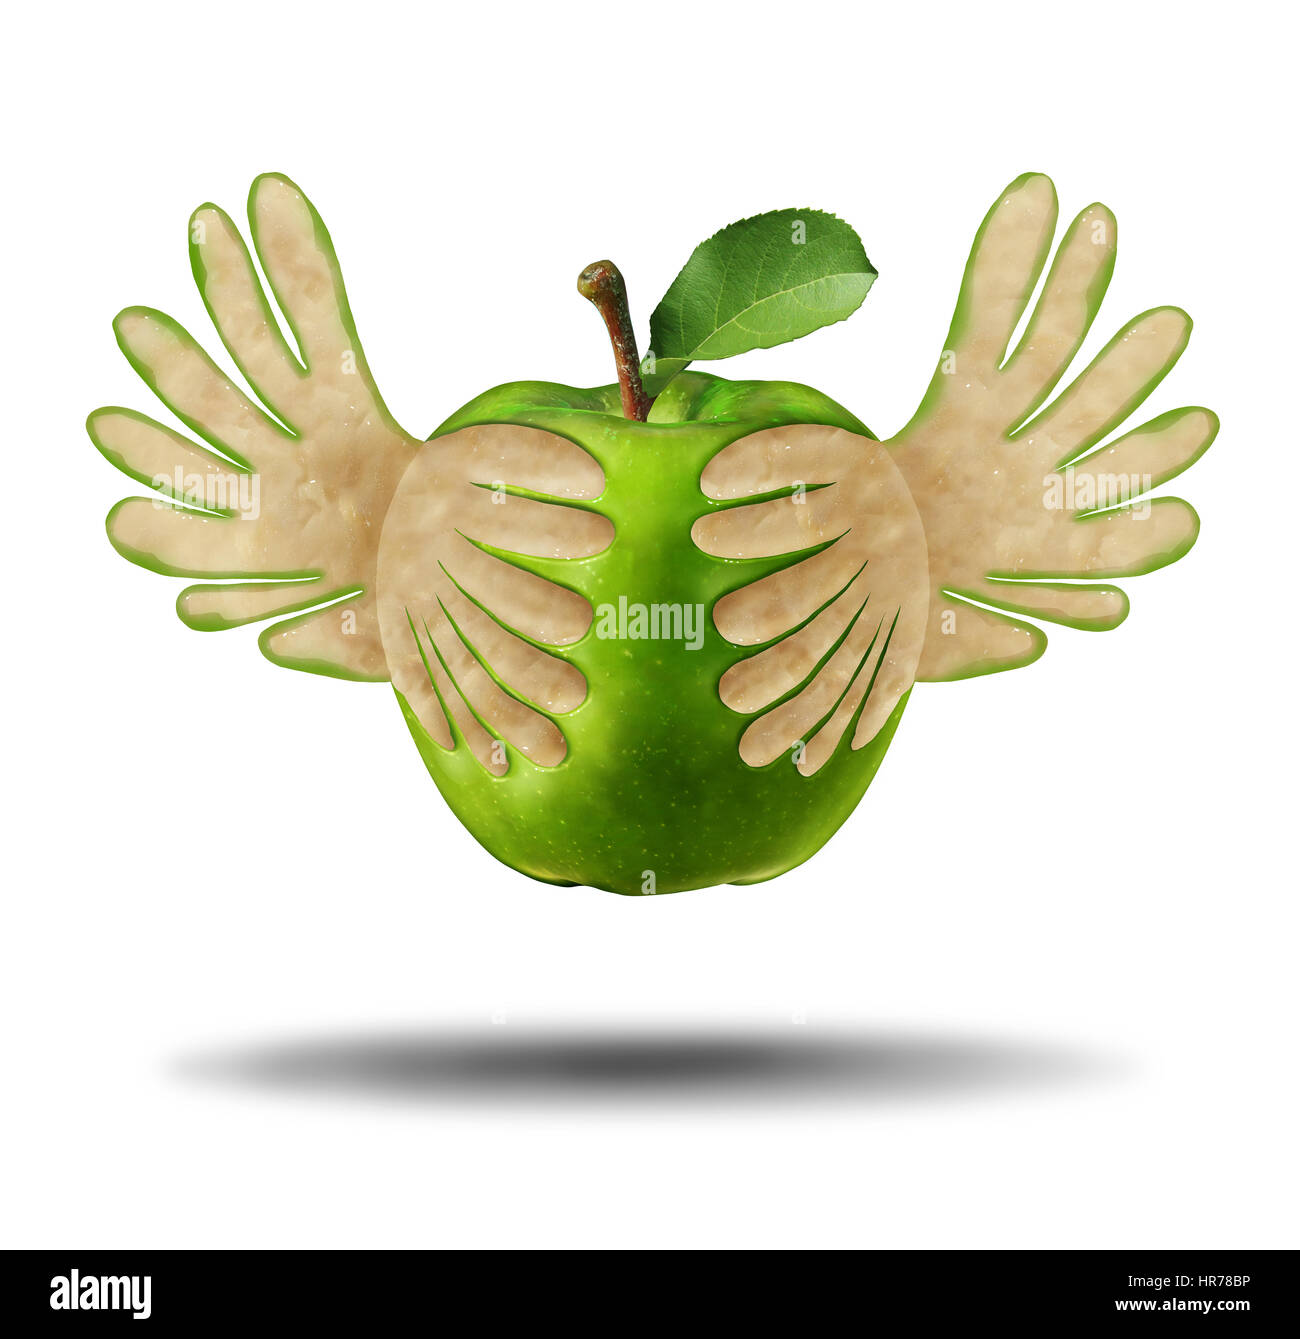 Eating light healthy food as a green apple with the peel shaped as flying wings as a symbol for the power of fresh nutrition. Stock Photo